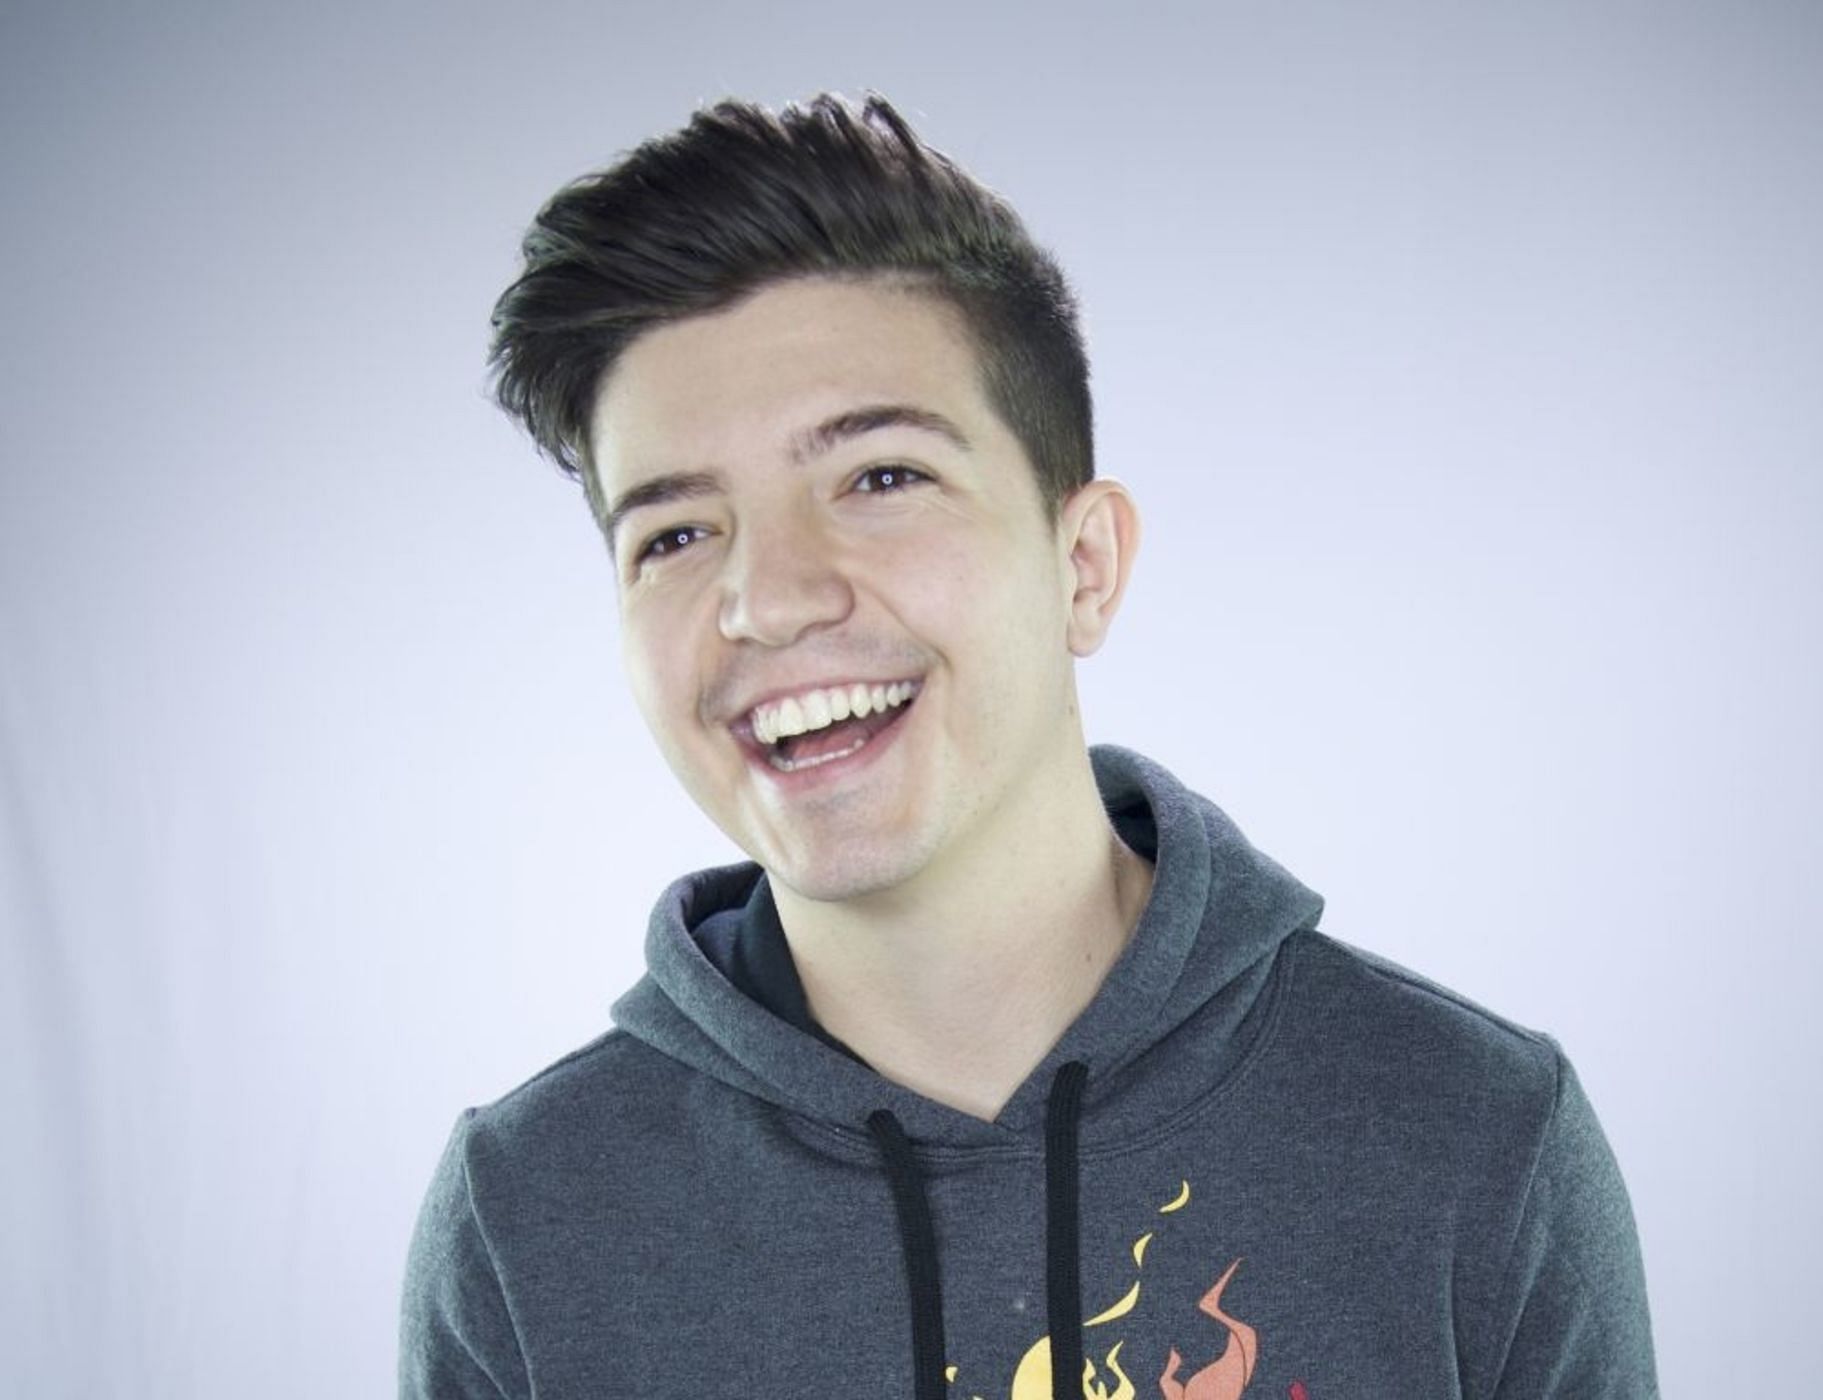 PrestonPlayz is a member of The Pack alongside the likes of JeromeASF (Image via SportsPro)